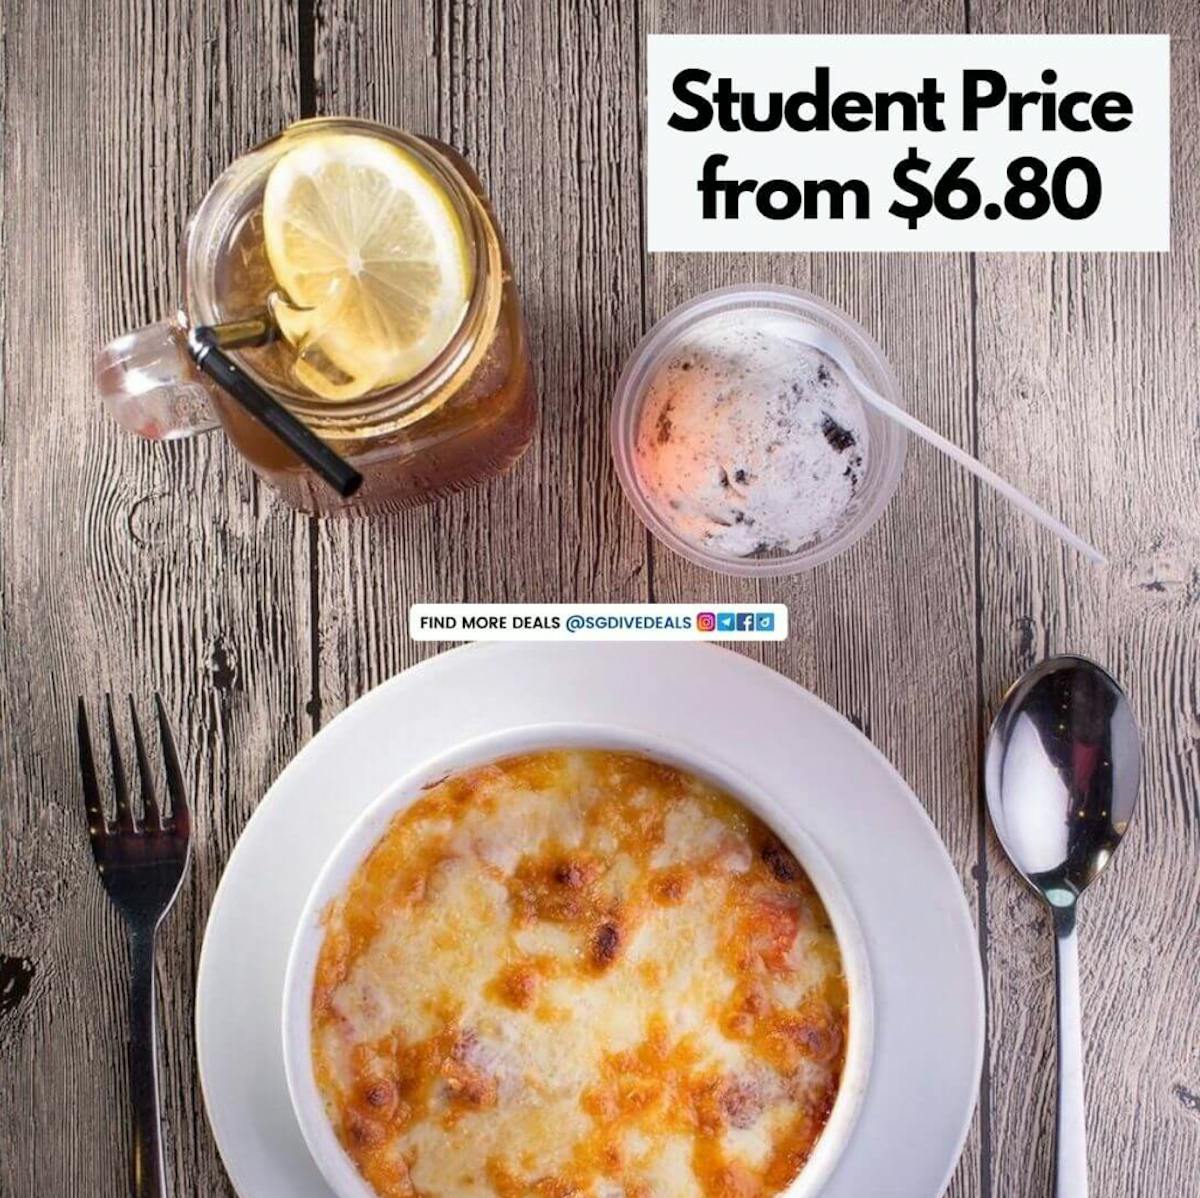 Student meals from $6.80